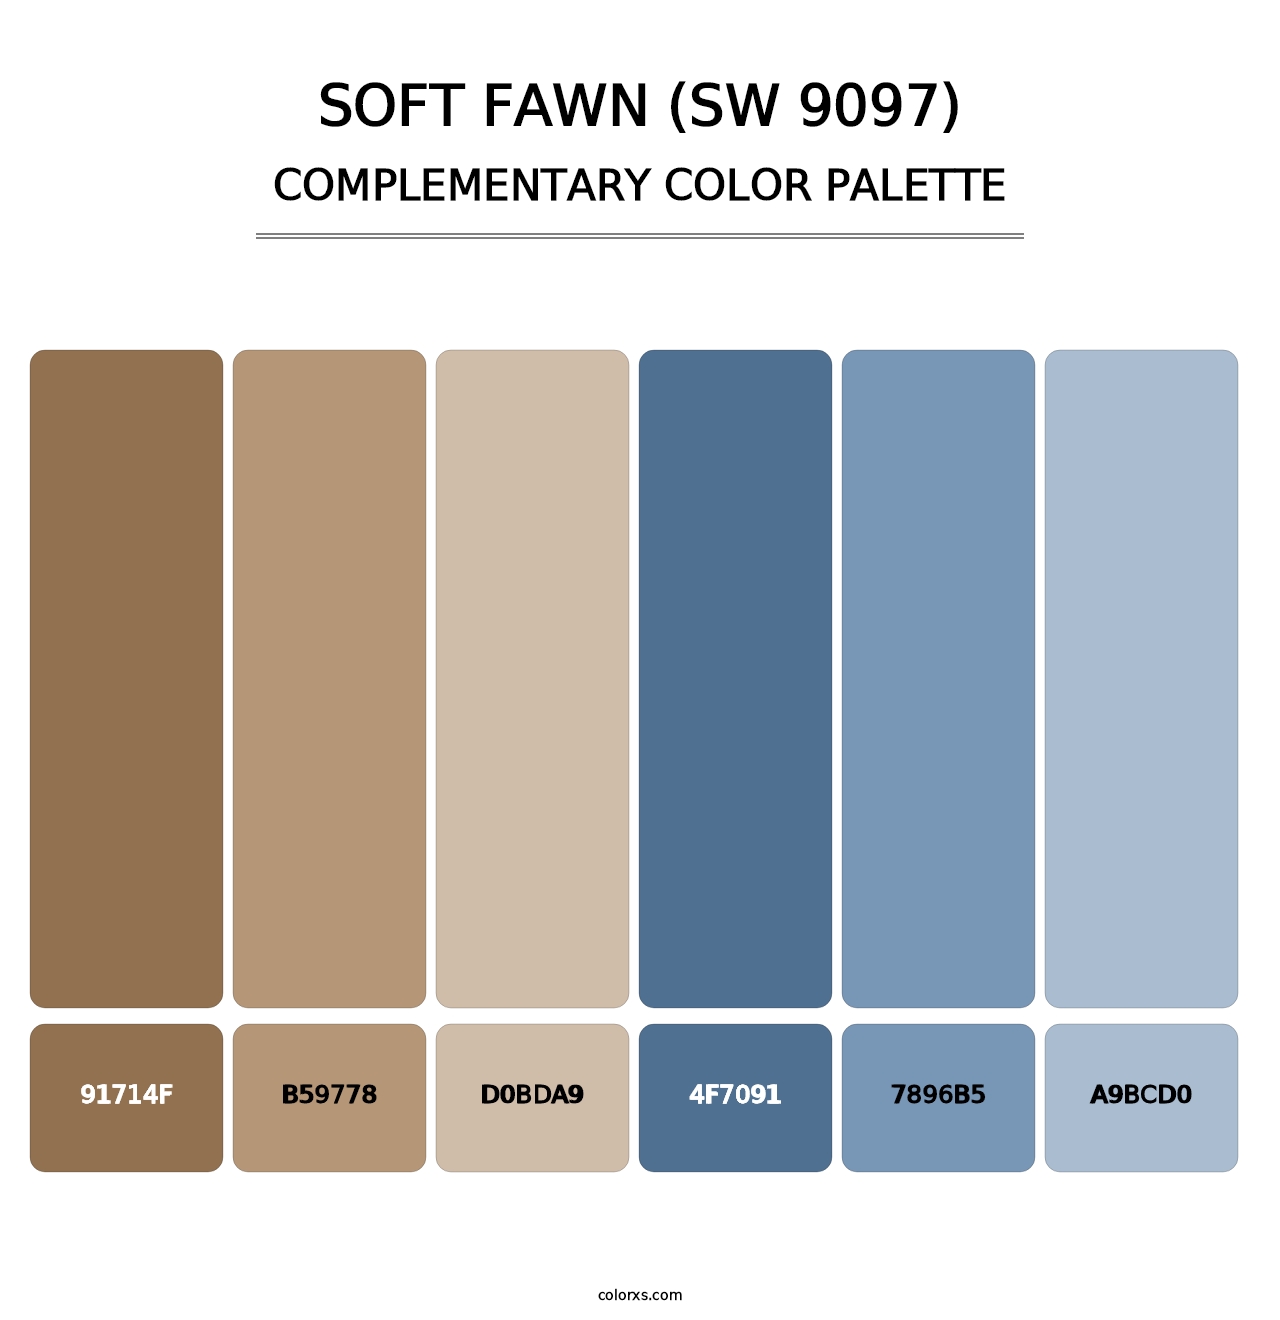 Soft Fawn (SW 9097) - Complementary Color Palette